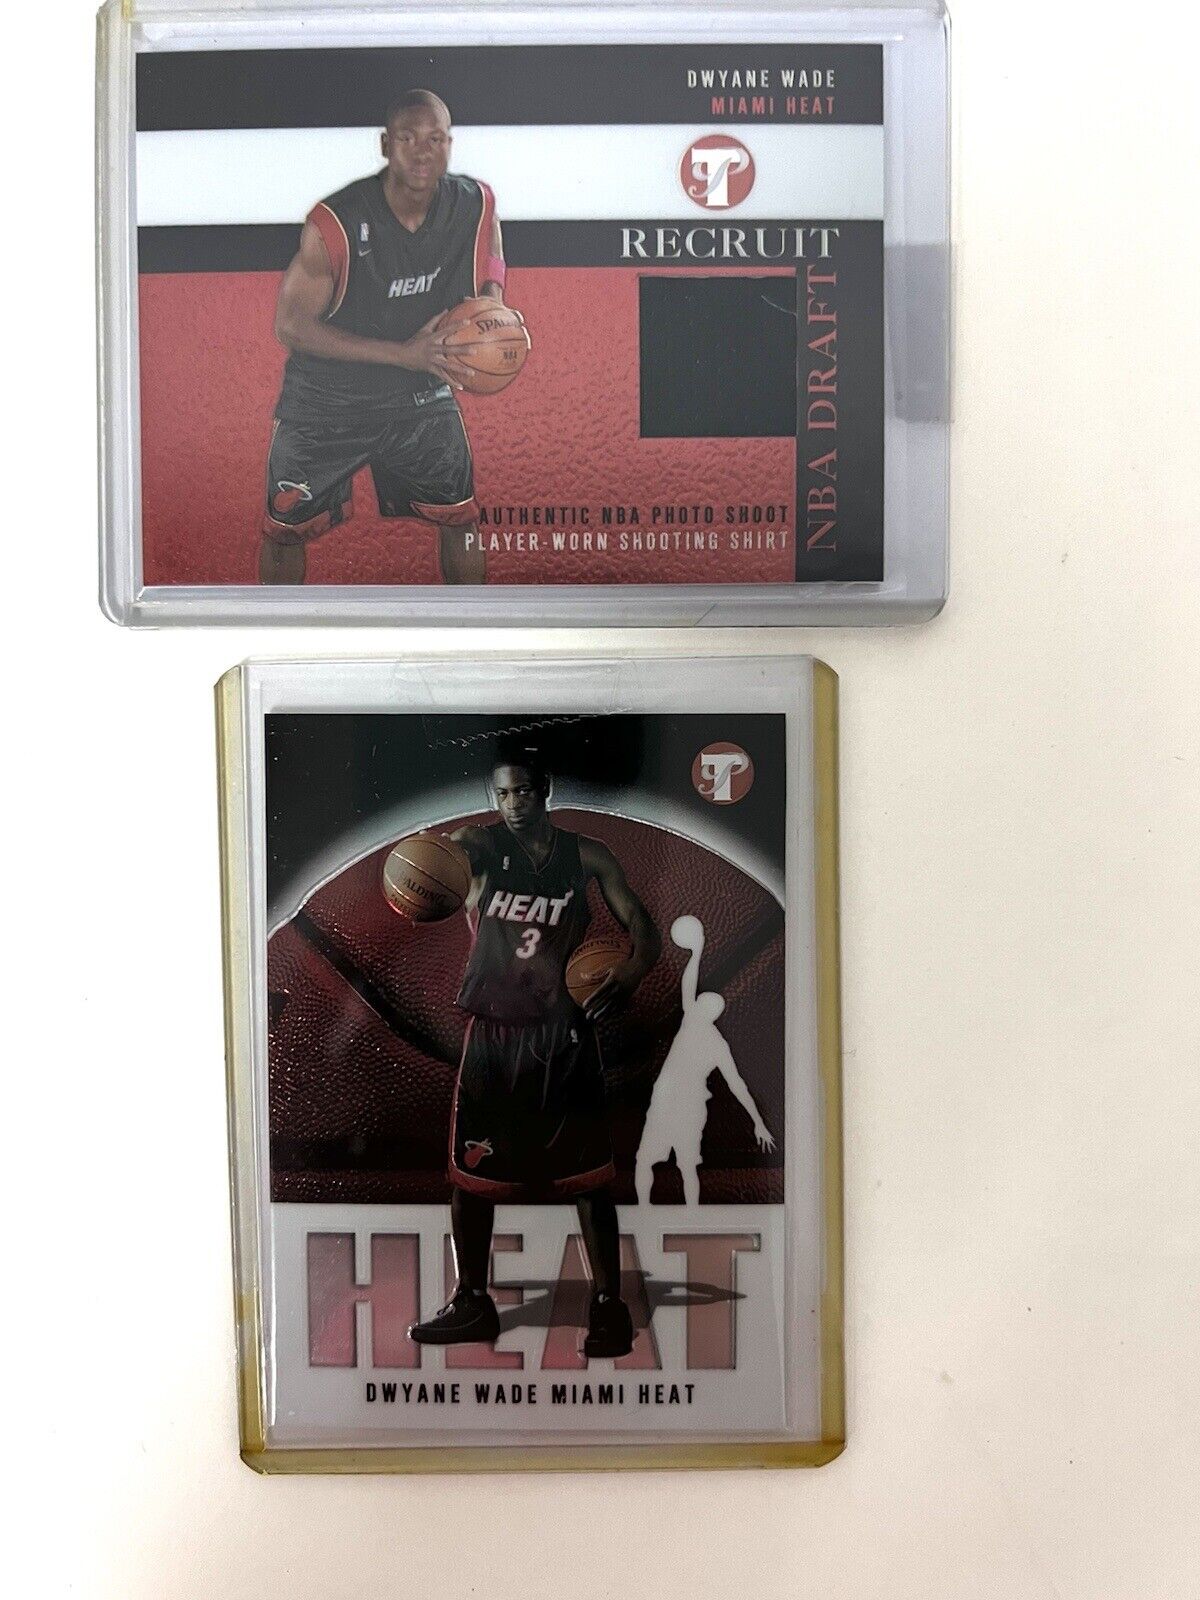 2003-04 Topps Pristine Dwayne Wade Rookie Cards #113 +Recruit Used Patch PR-DWY